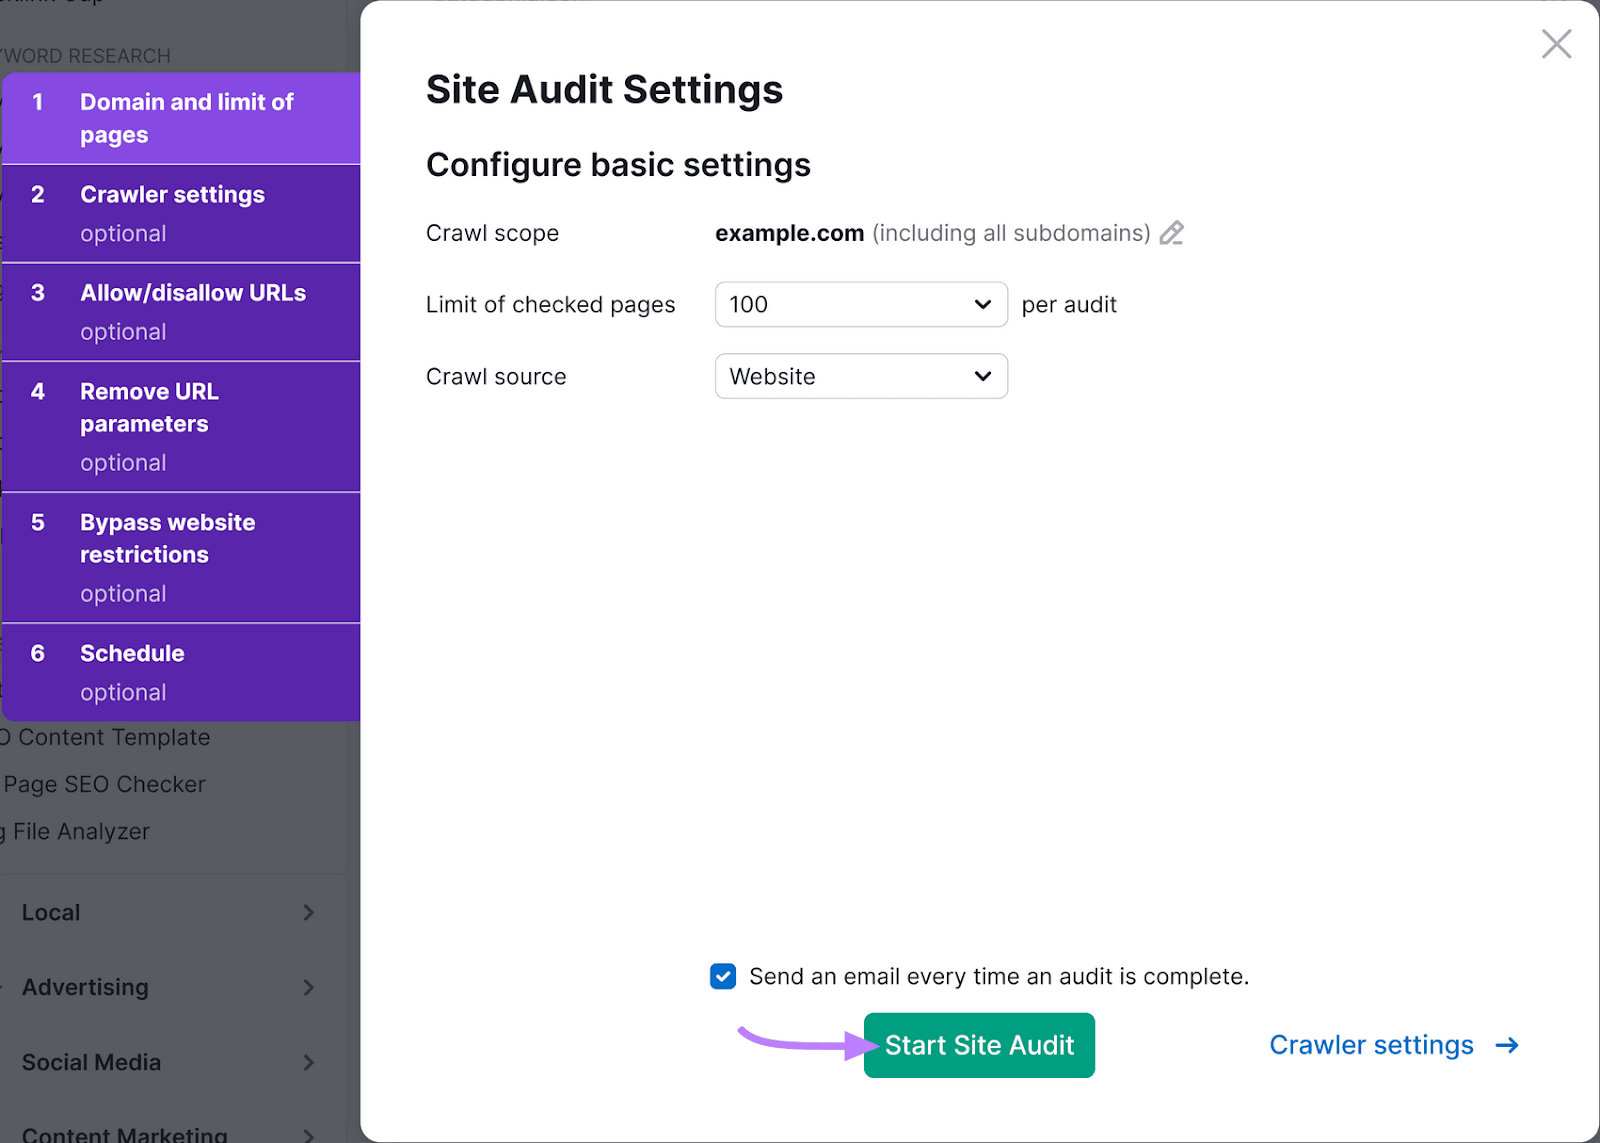 Site Audit Settings with options to configure basic settings and an arrow pointing to a green "Start Site Audit" button.